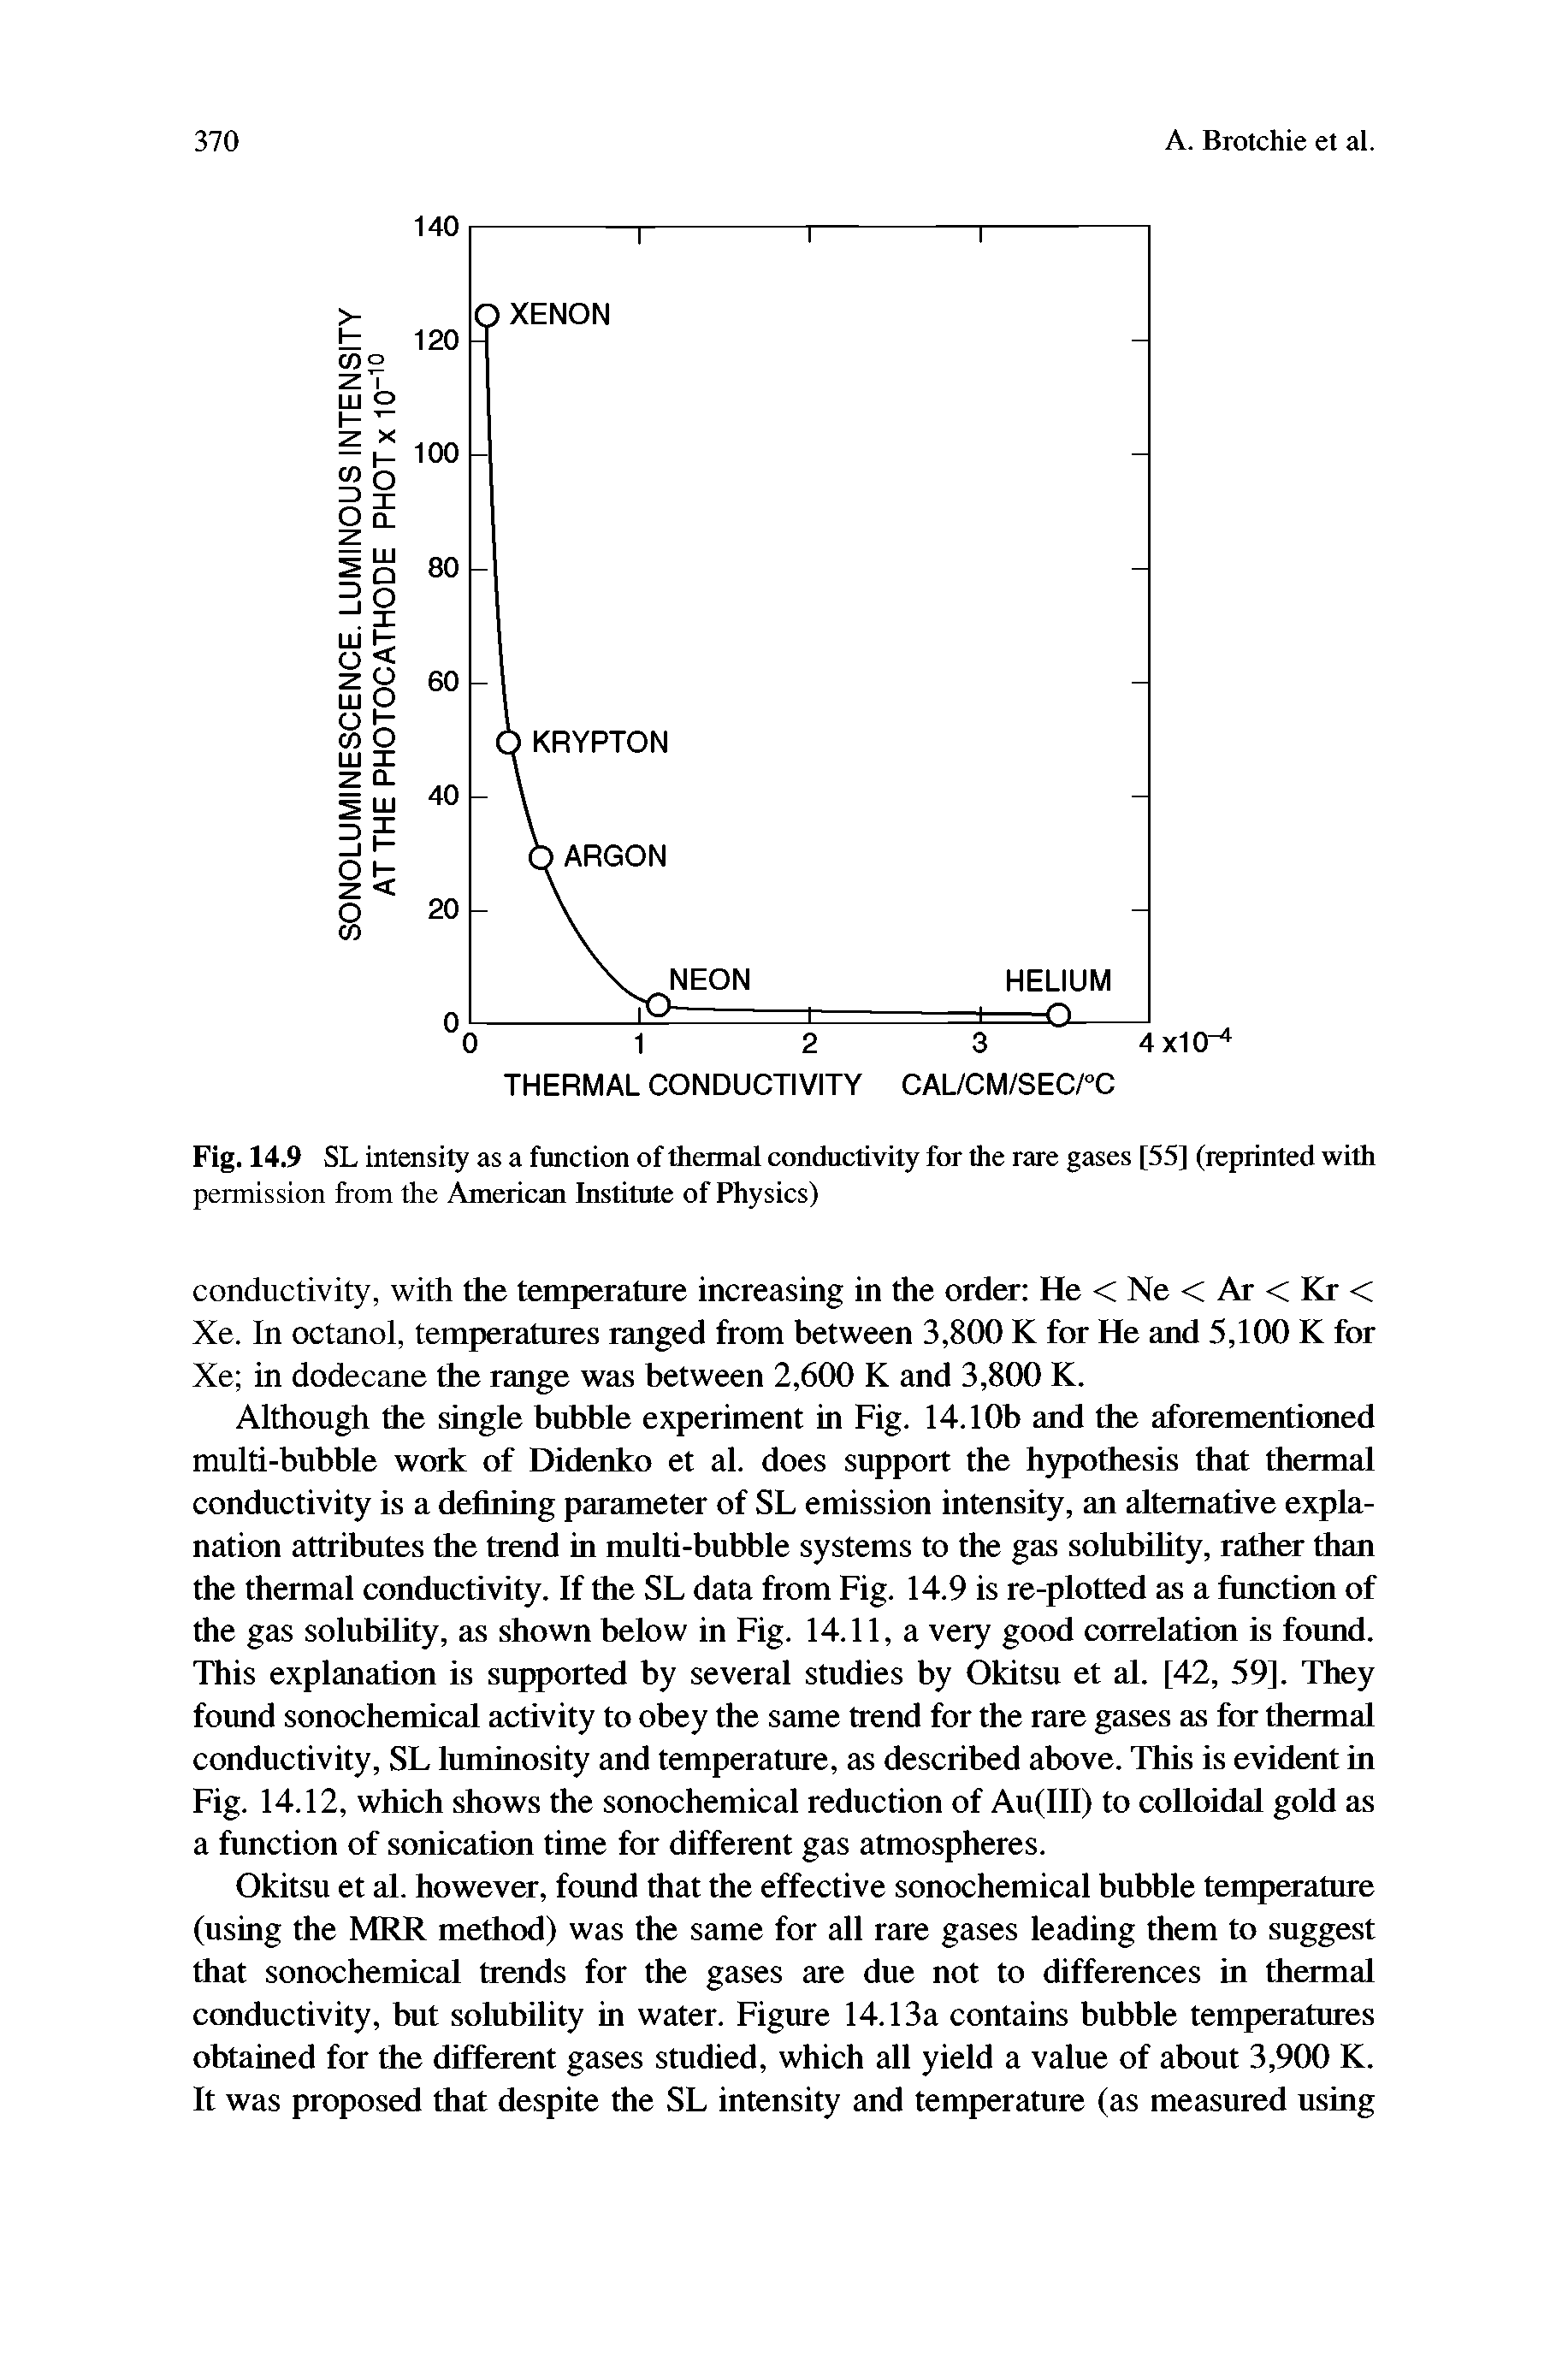 Fig. 14.9 SL intensity as a function of thermal conductivity for the rare gases [55] (reprinted with permission from the American Institute of Physics)...